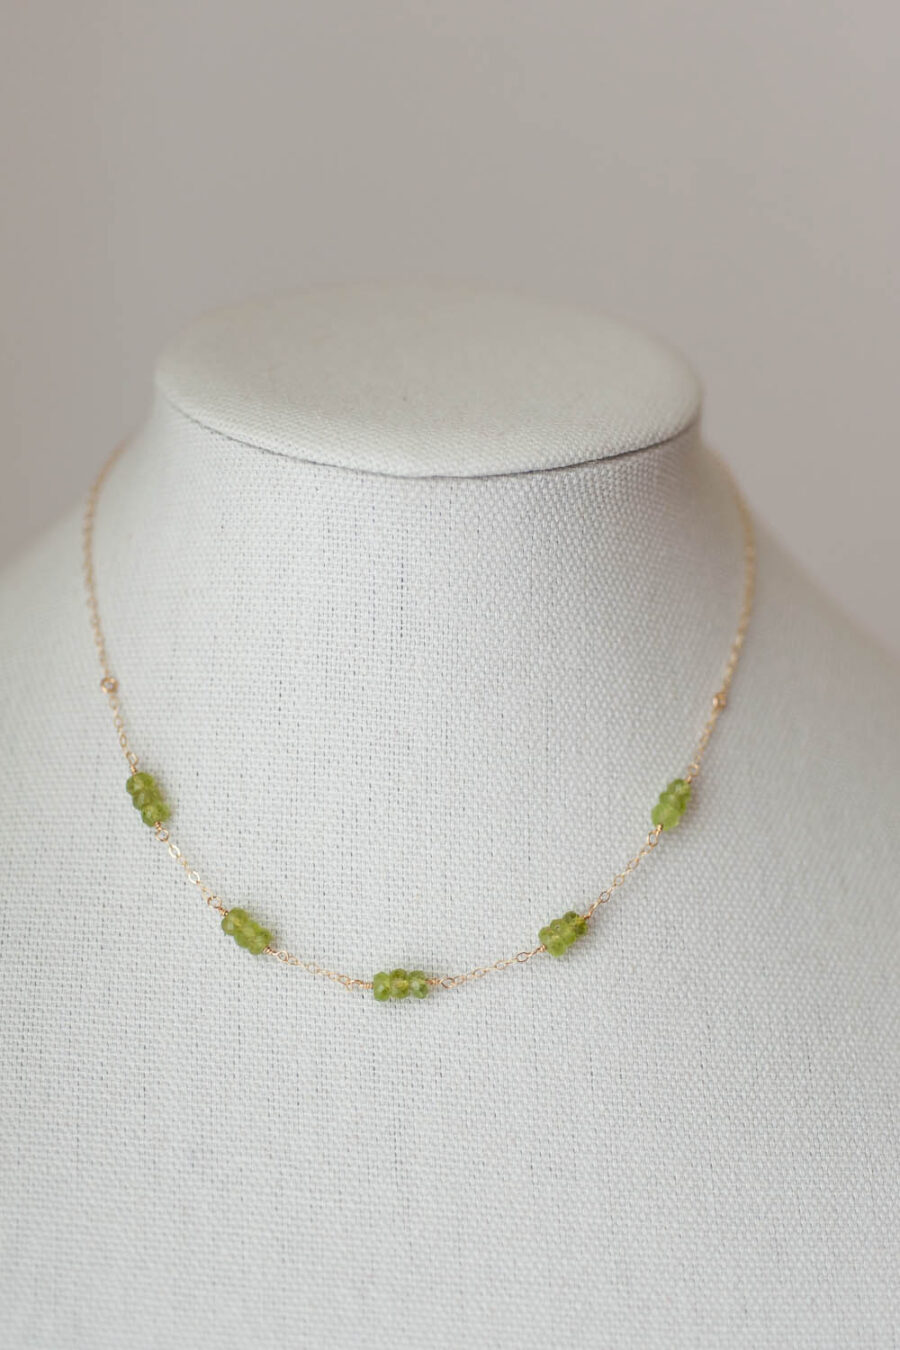 August Birthstone Peridot Necklace